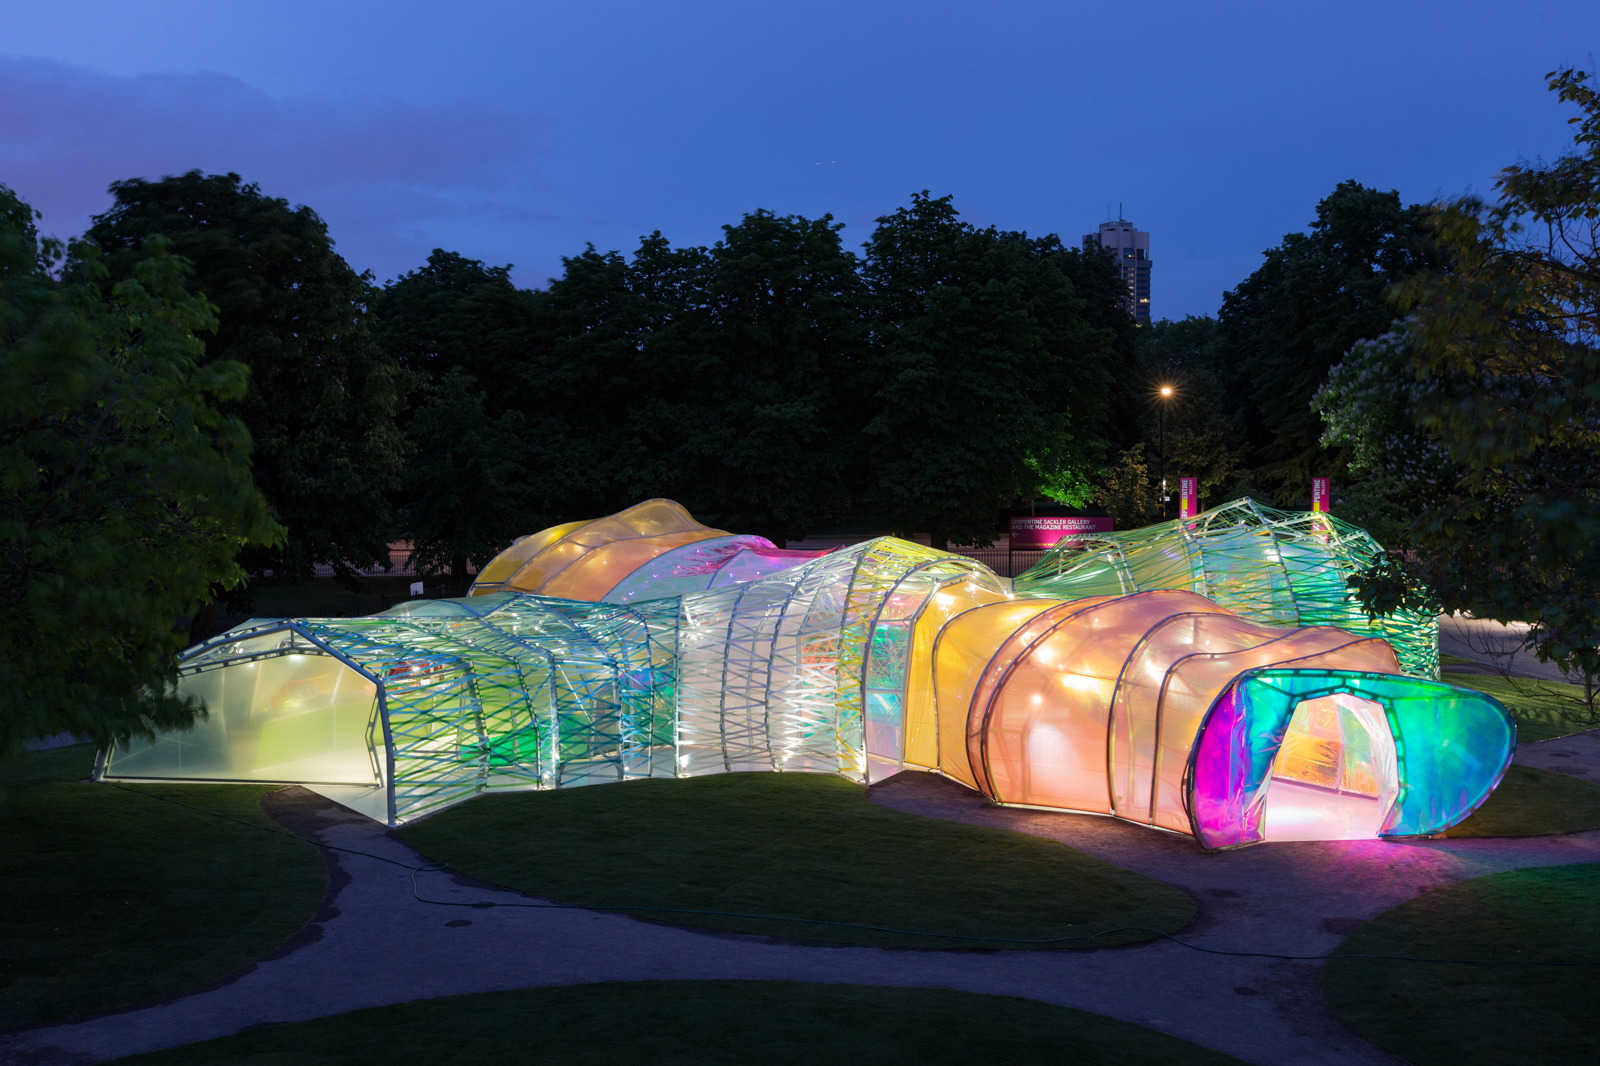 Serpentine-Pavilion-designed-by-Selgascano-2015-photo-by-Iwan-Baan